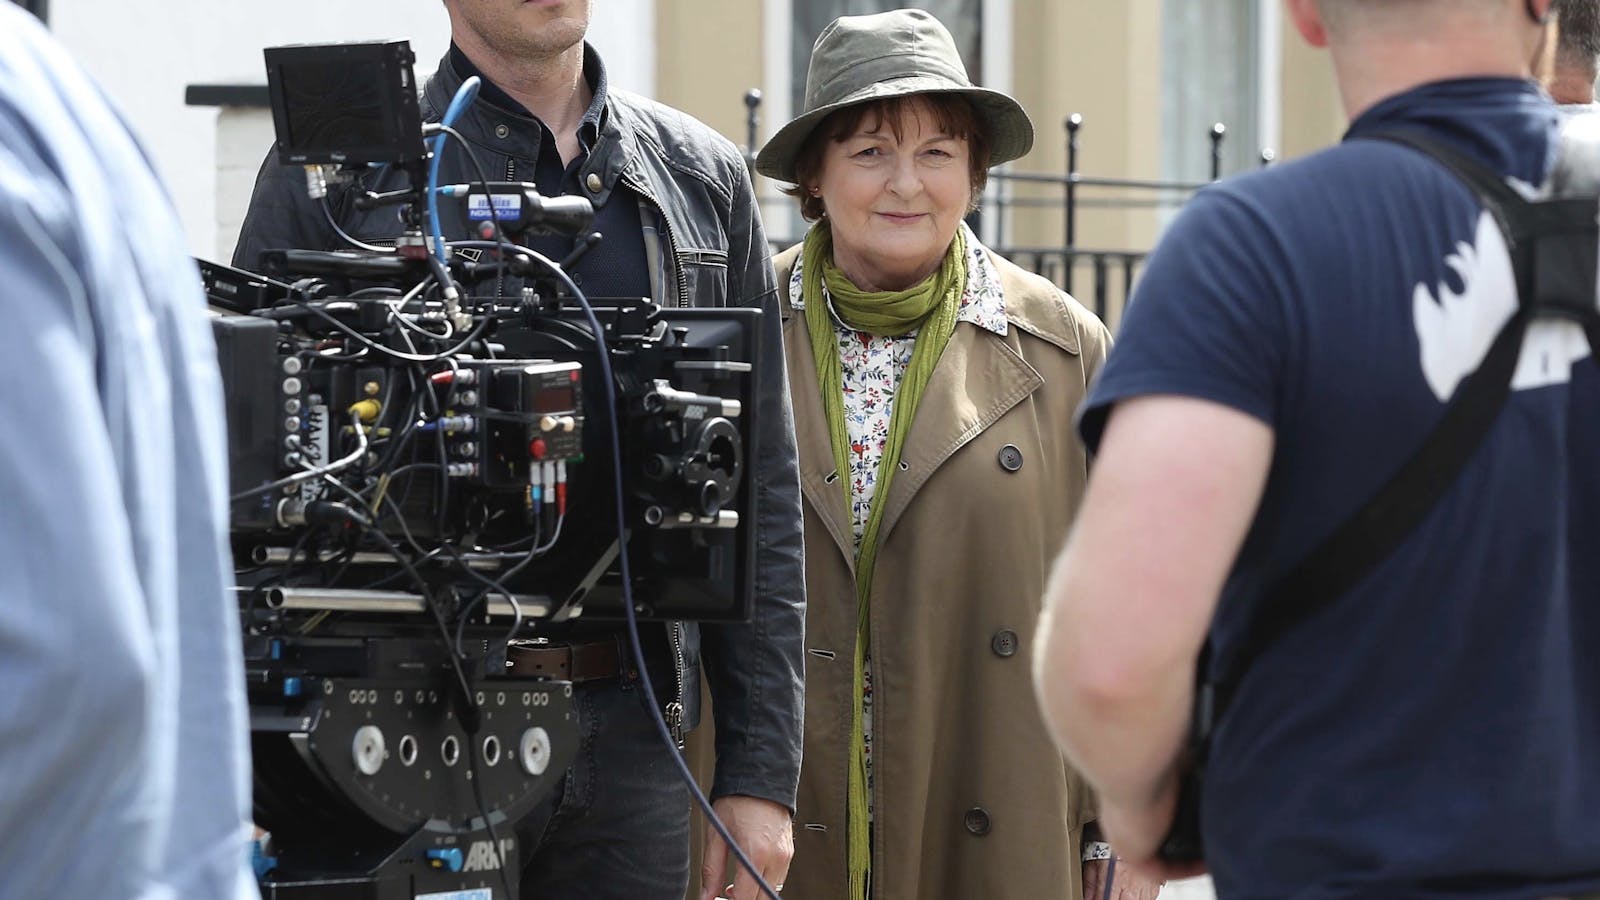 Actress Brenda Blethyn during filming of the police drama "Vera," one of BritBox's popular shows. Photo by AP